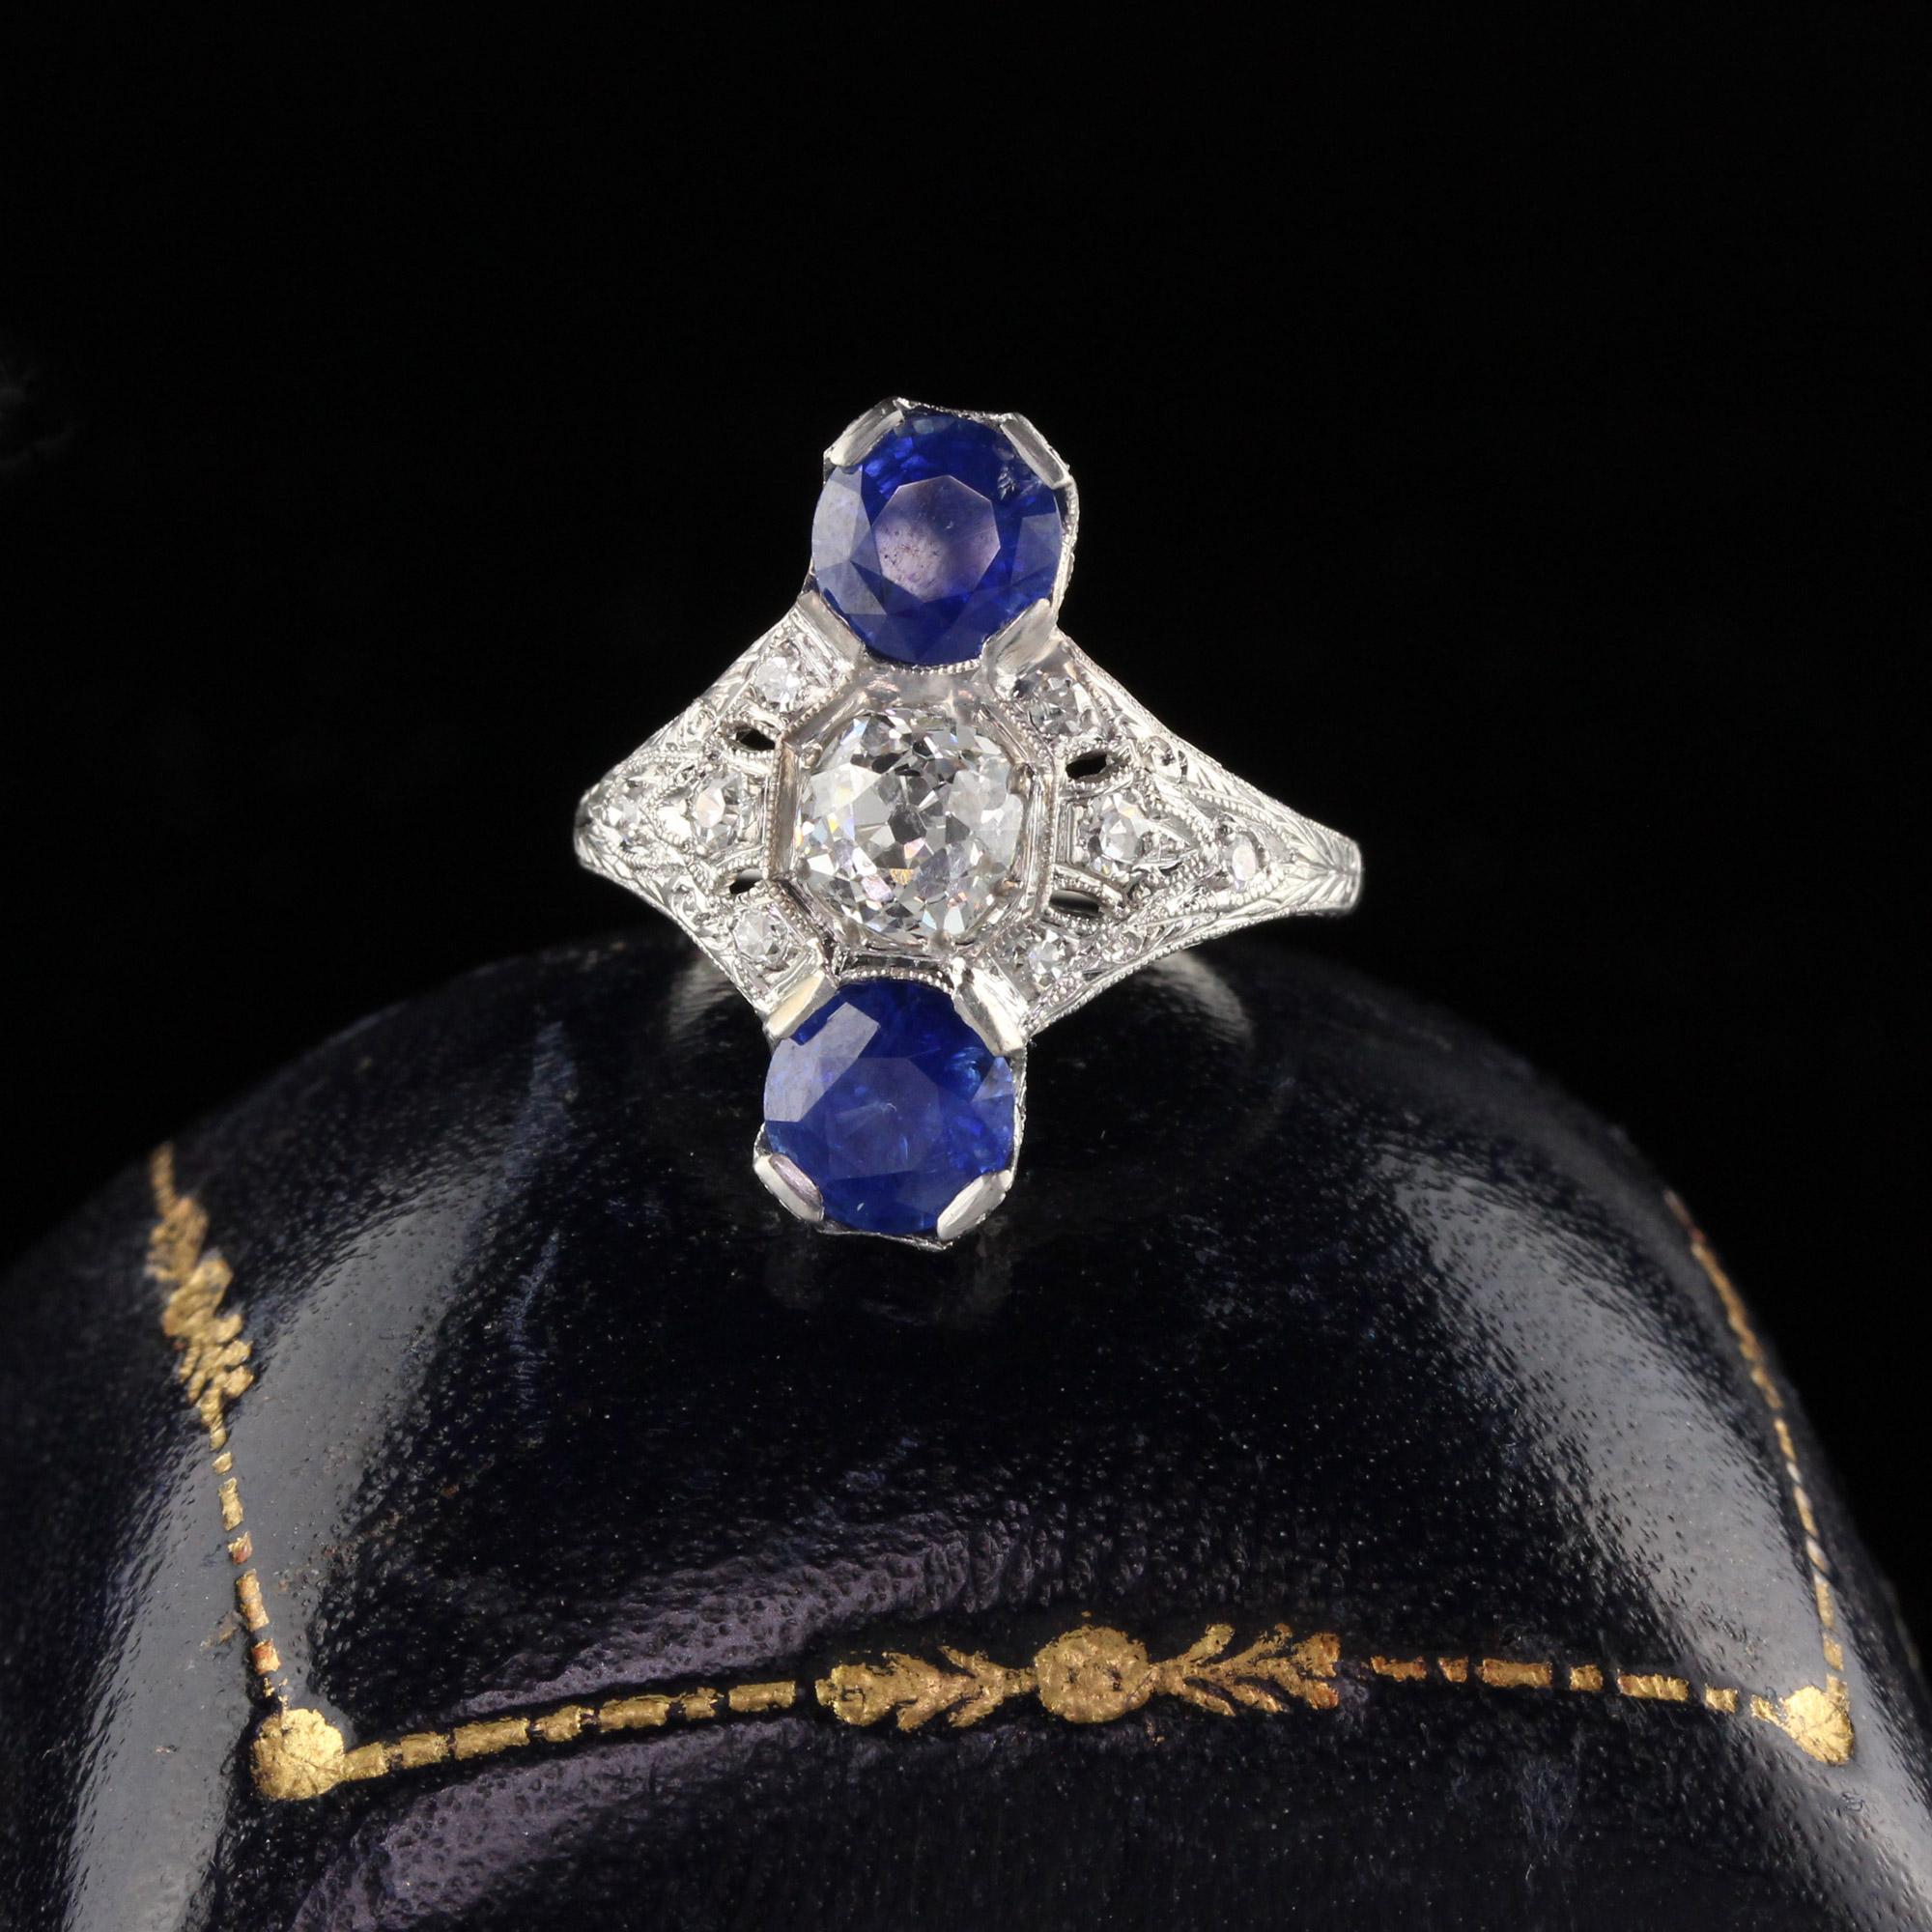 Gorgeous Edwardian shield ring with 2 sapphires and a 0.80 CT Old European cut diamond in the center.

#R0410

Metal: Platinum

Weight: 5.1 Grams

Center Diamond Weight: Approximately 0.80 CTS 

Center Diamond Color: H

Center Diamond Clarity: